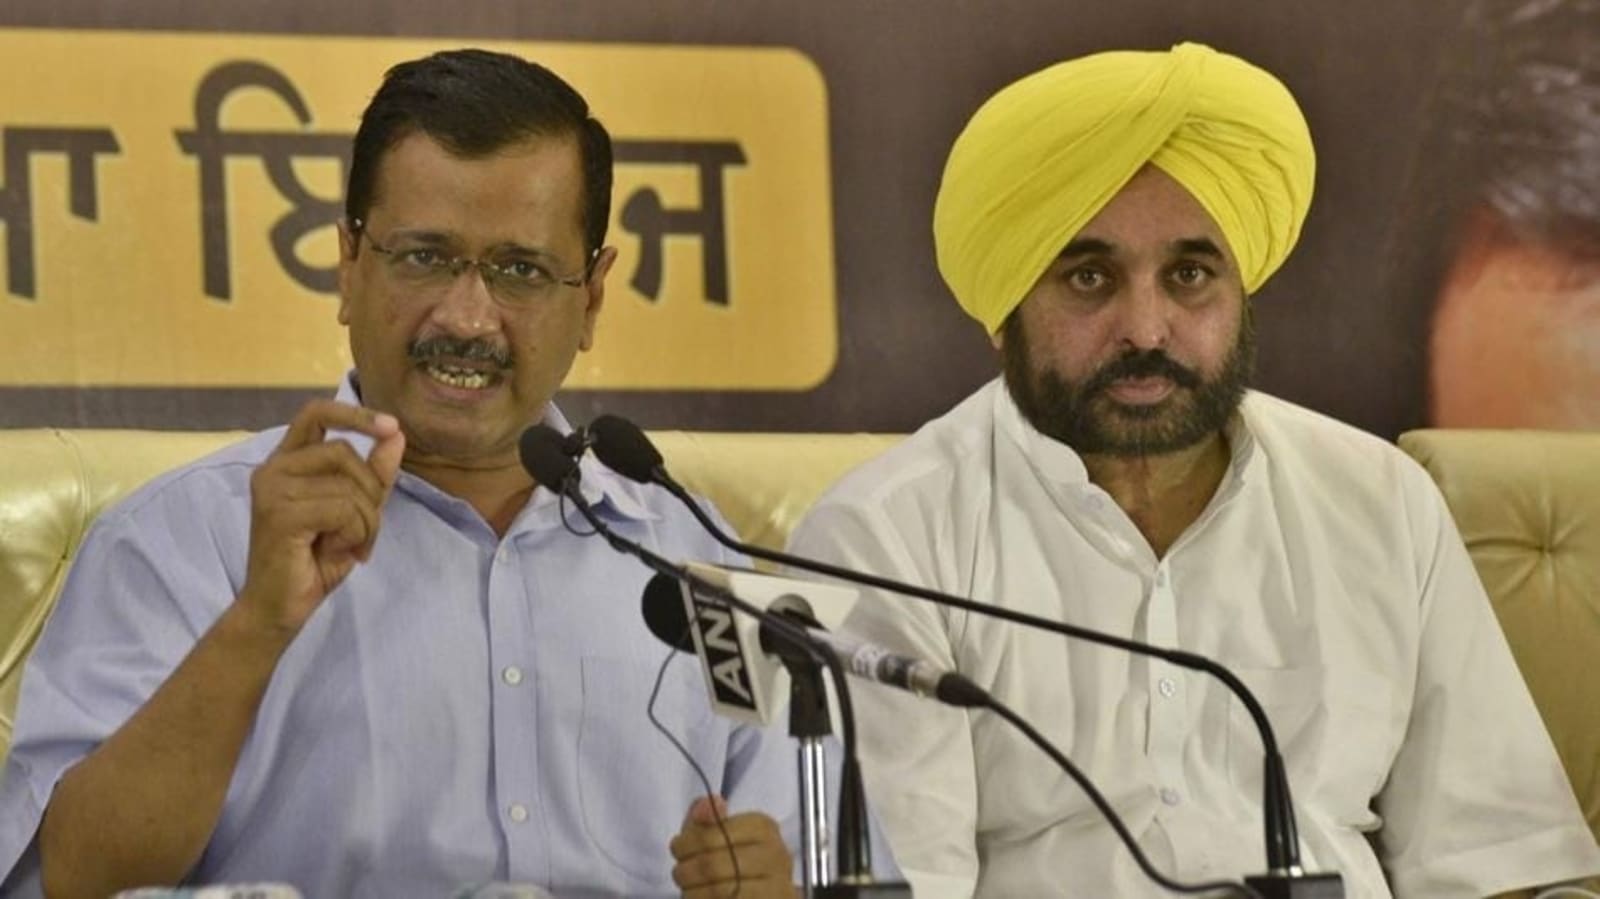 Punjab elections: AAP releases first list of 10 candidates - Hindustan Times